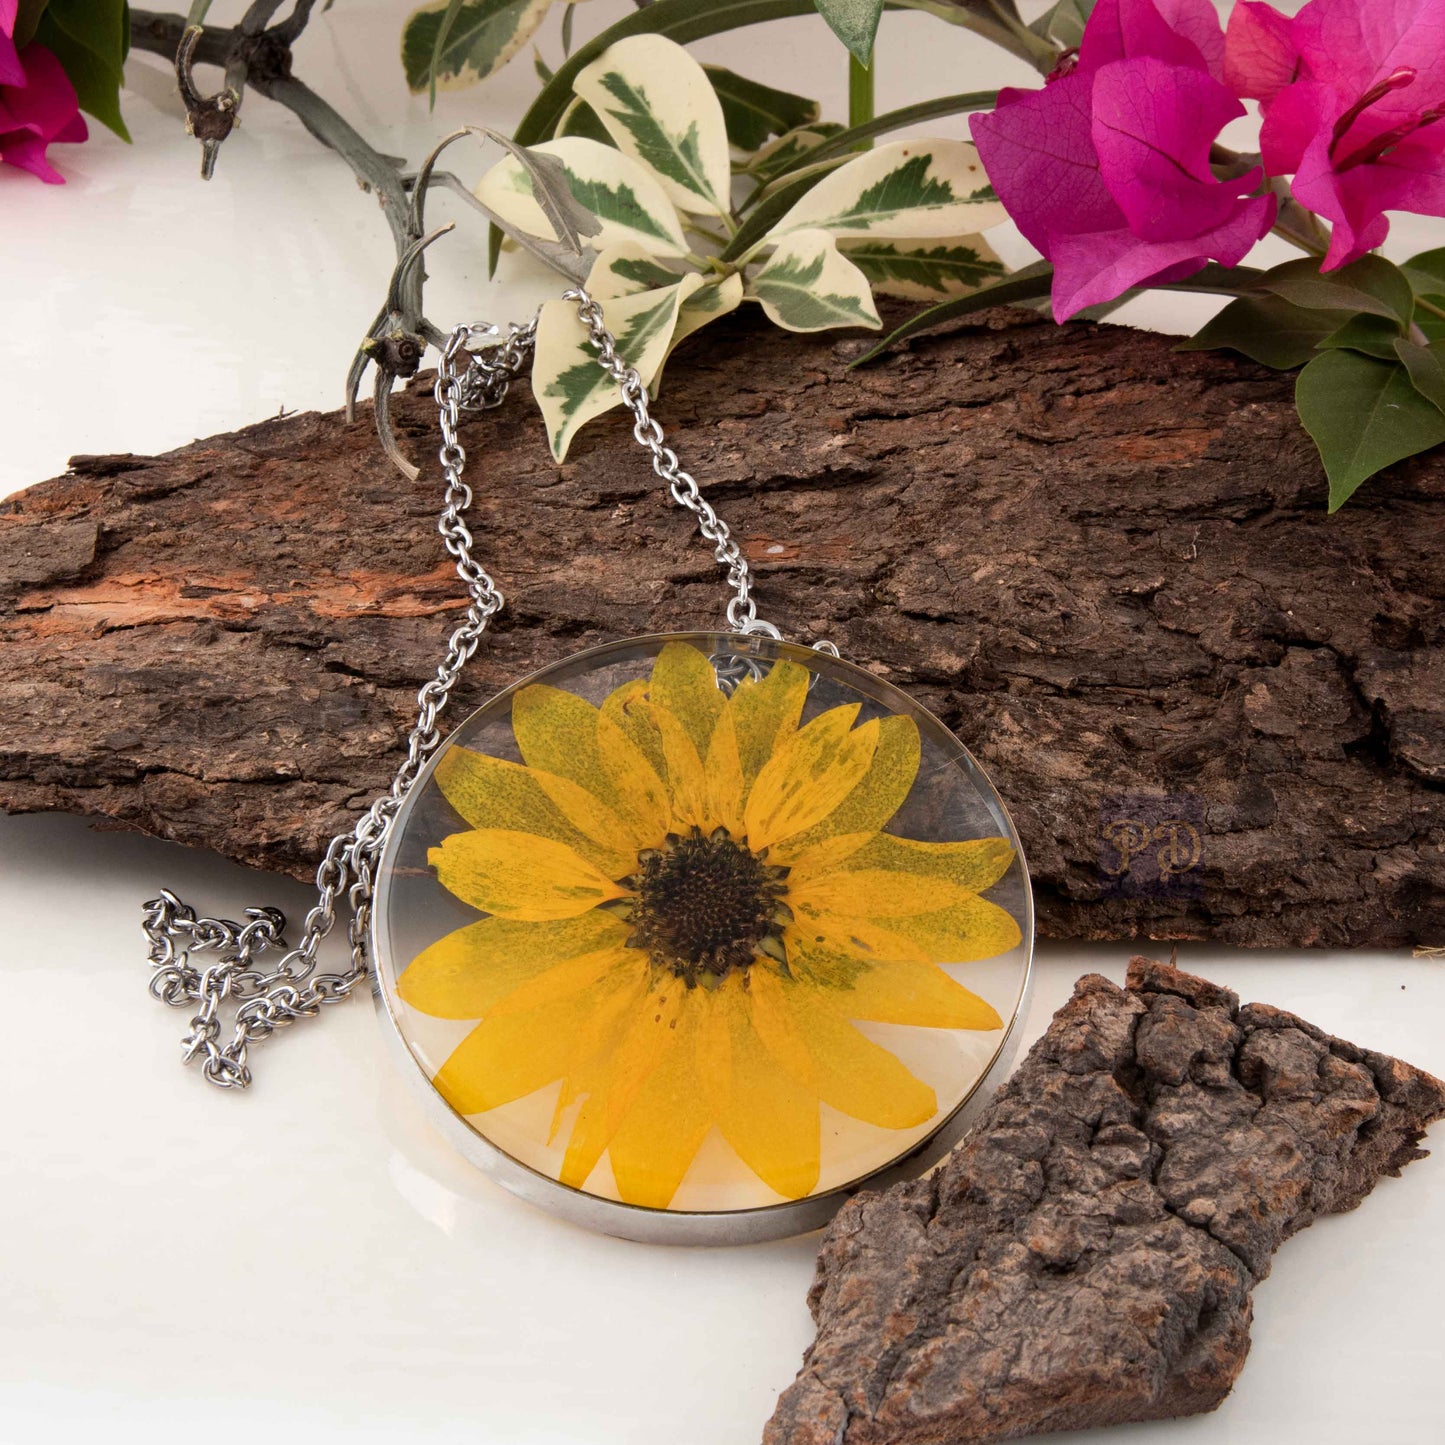 The Sunflower Necklace